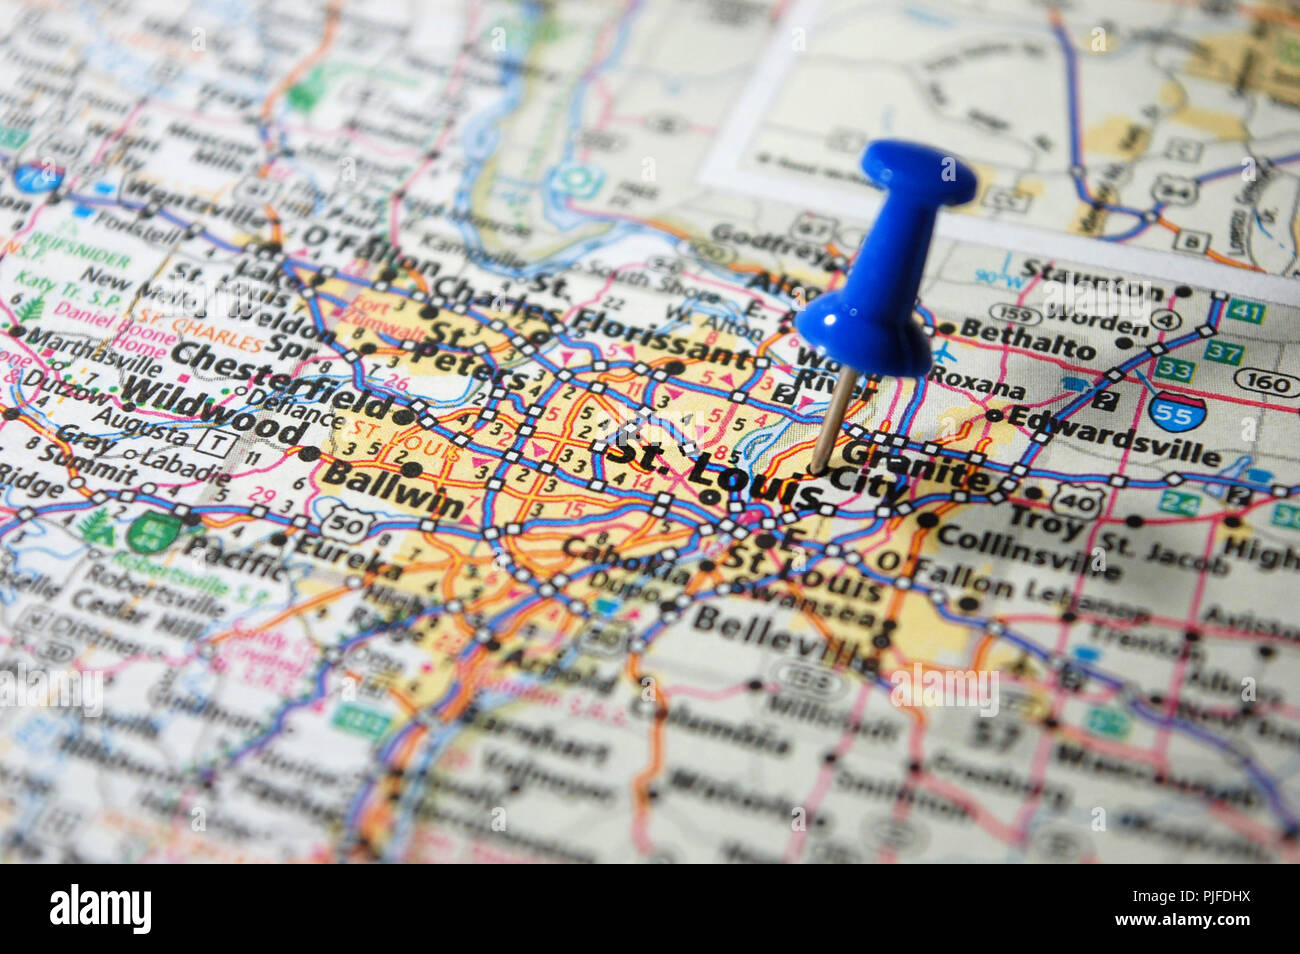 A map of St. Louis, Missouri marked with a push pin. Stock Photo